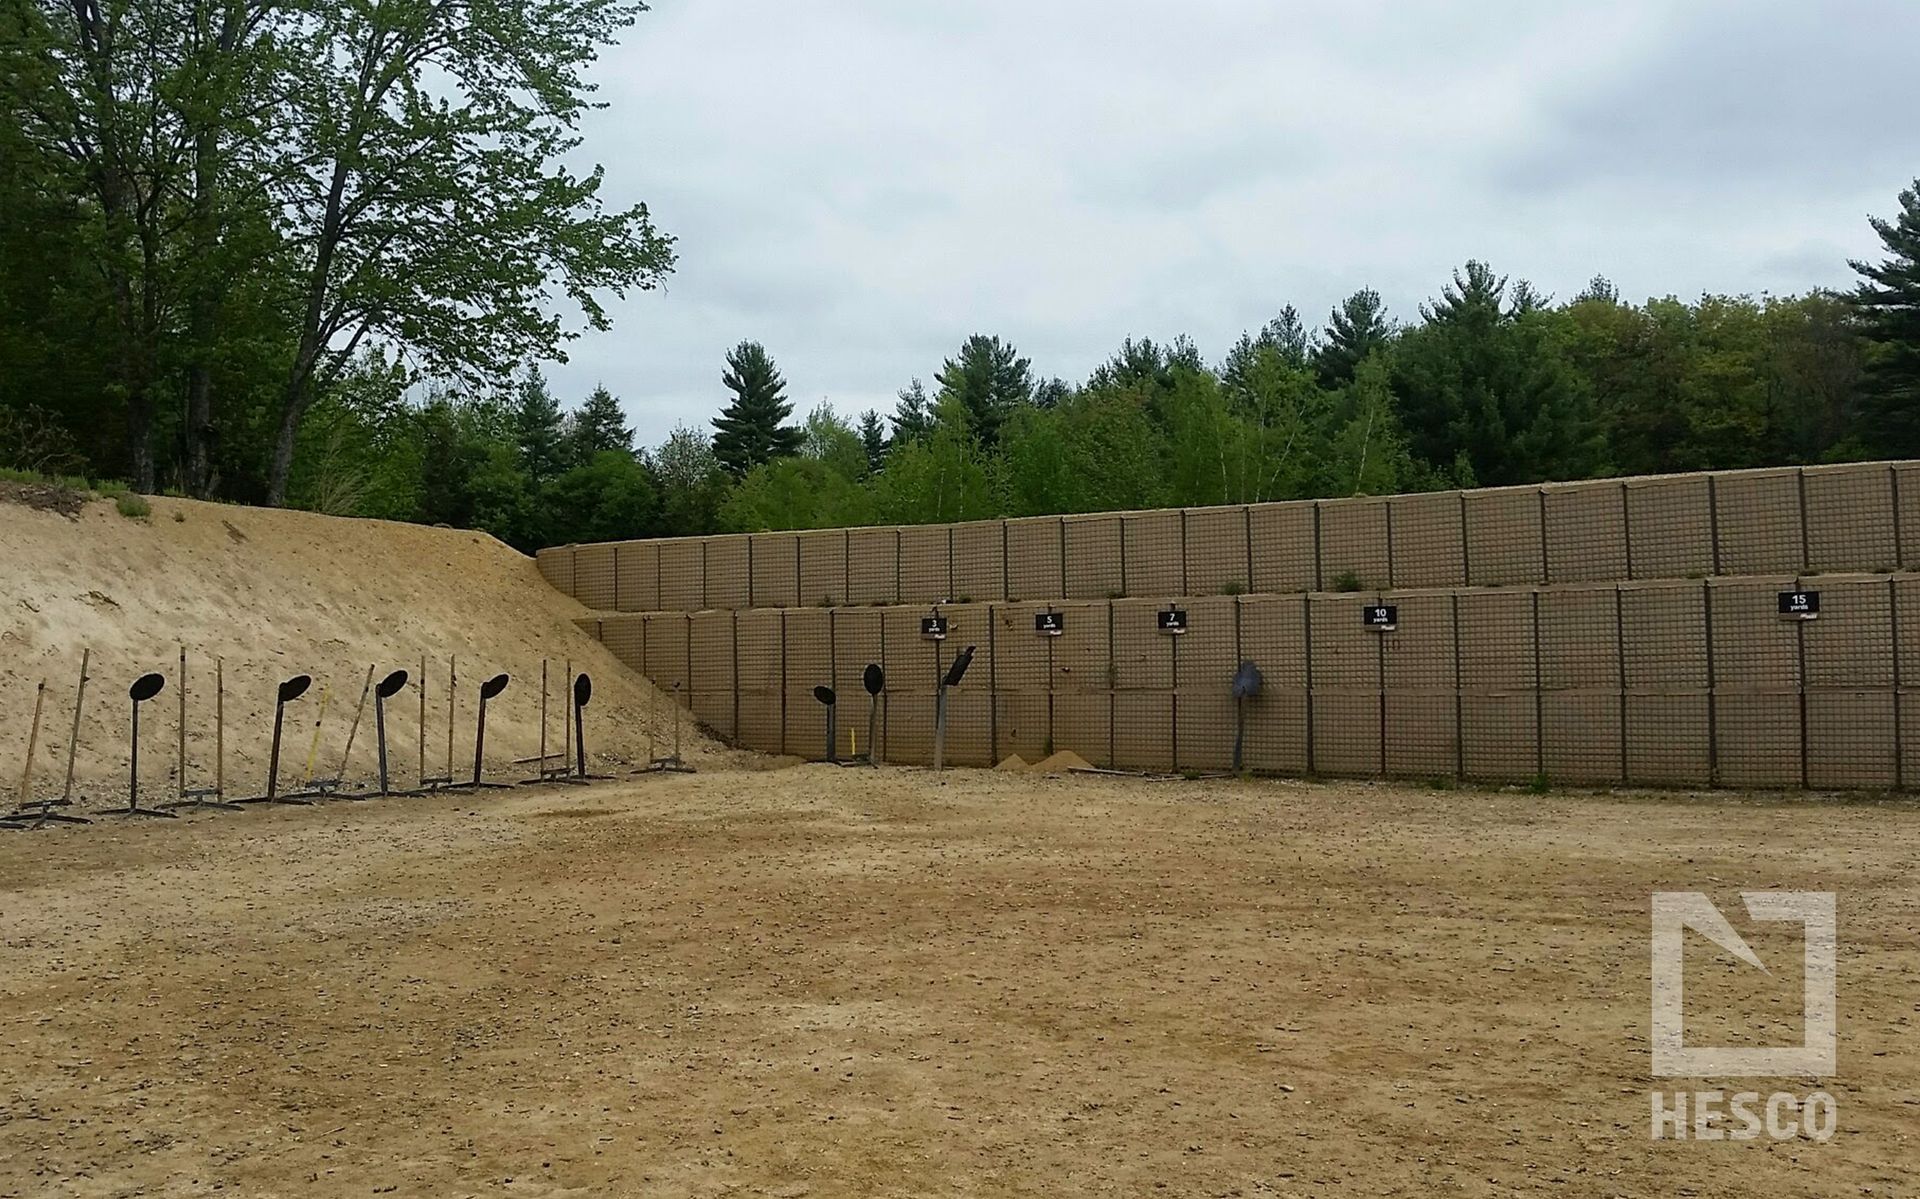 How to build a DIY shooting range with HESCO Barriers